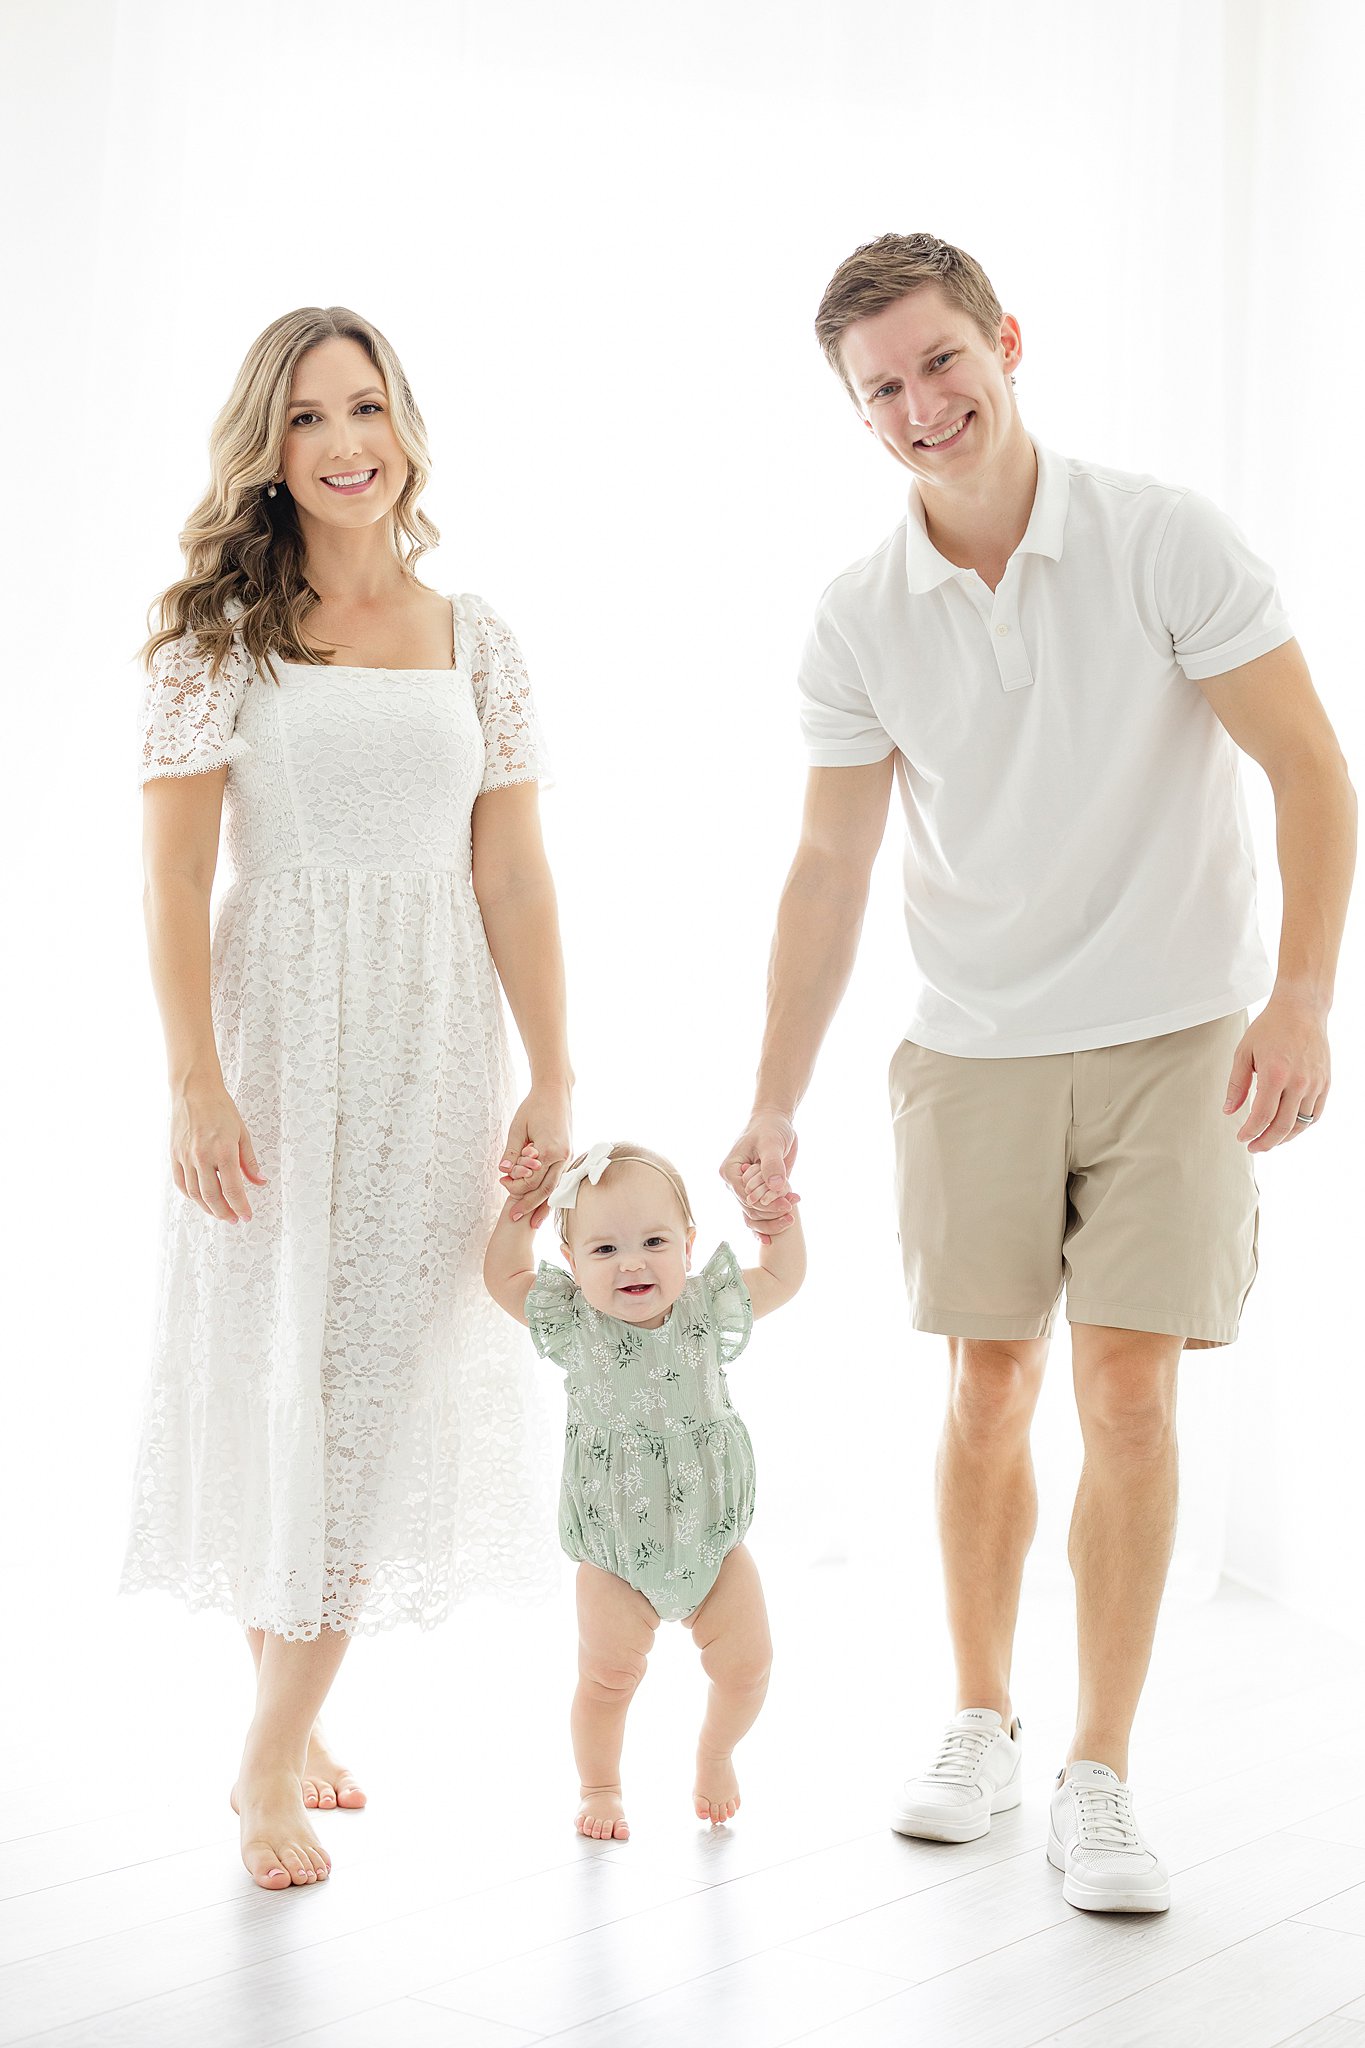 A mom and dad wearing white walk their toddler daughter through a studio holding her hands in a green onesie after meeting Nannies Indianapolis